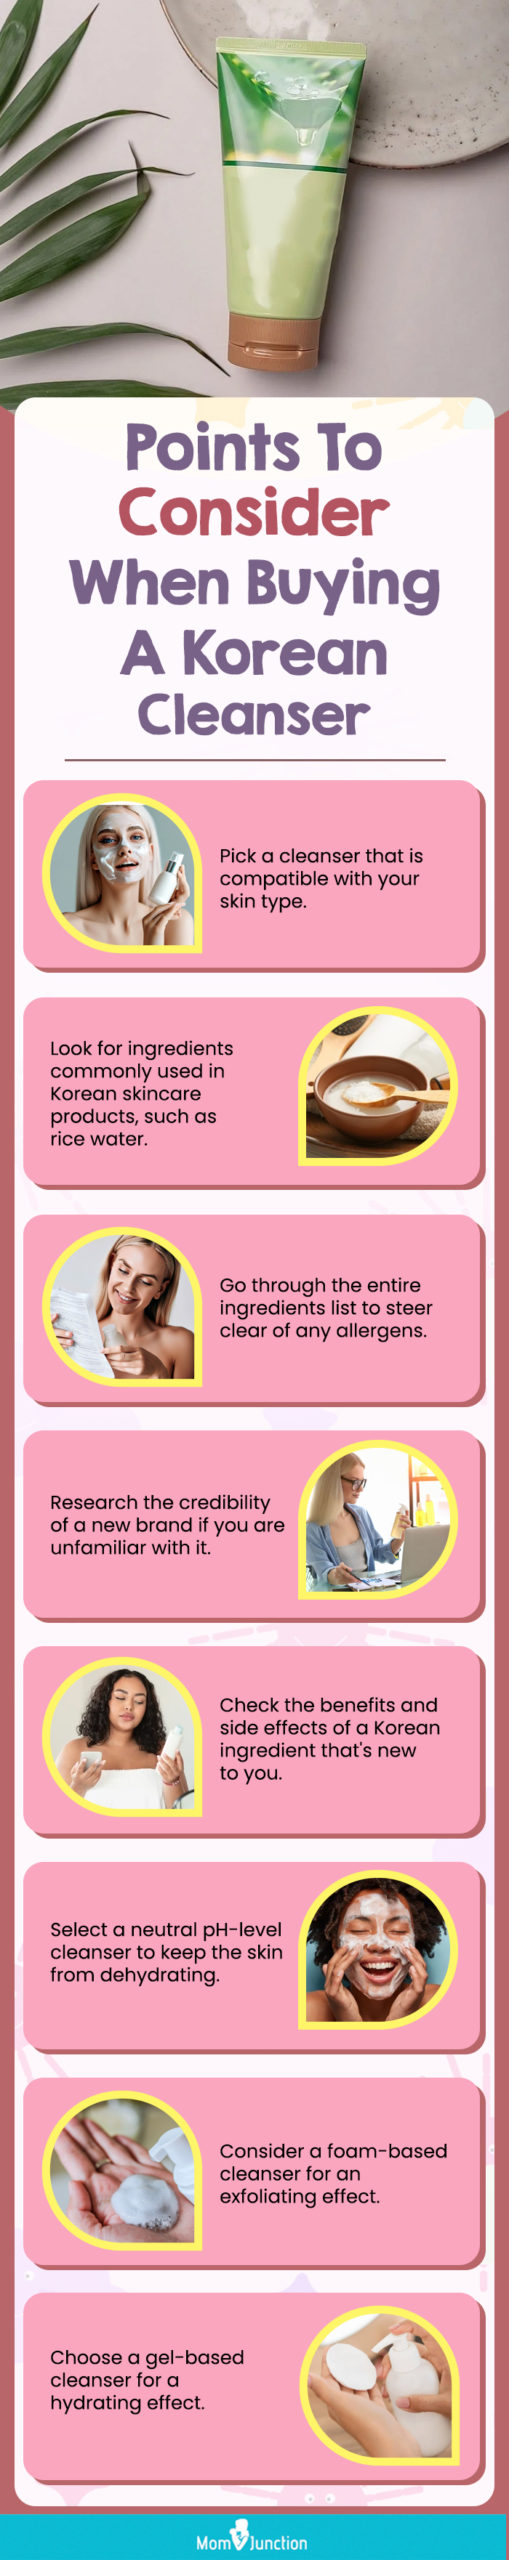 Points To Consider When Buying A Korean Cleanser (infographic)